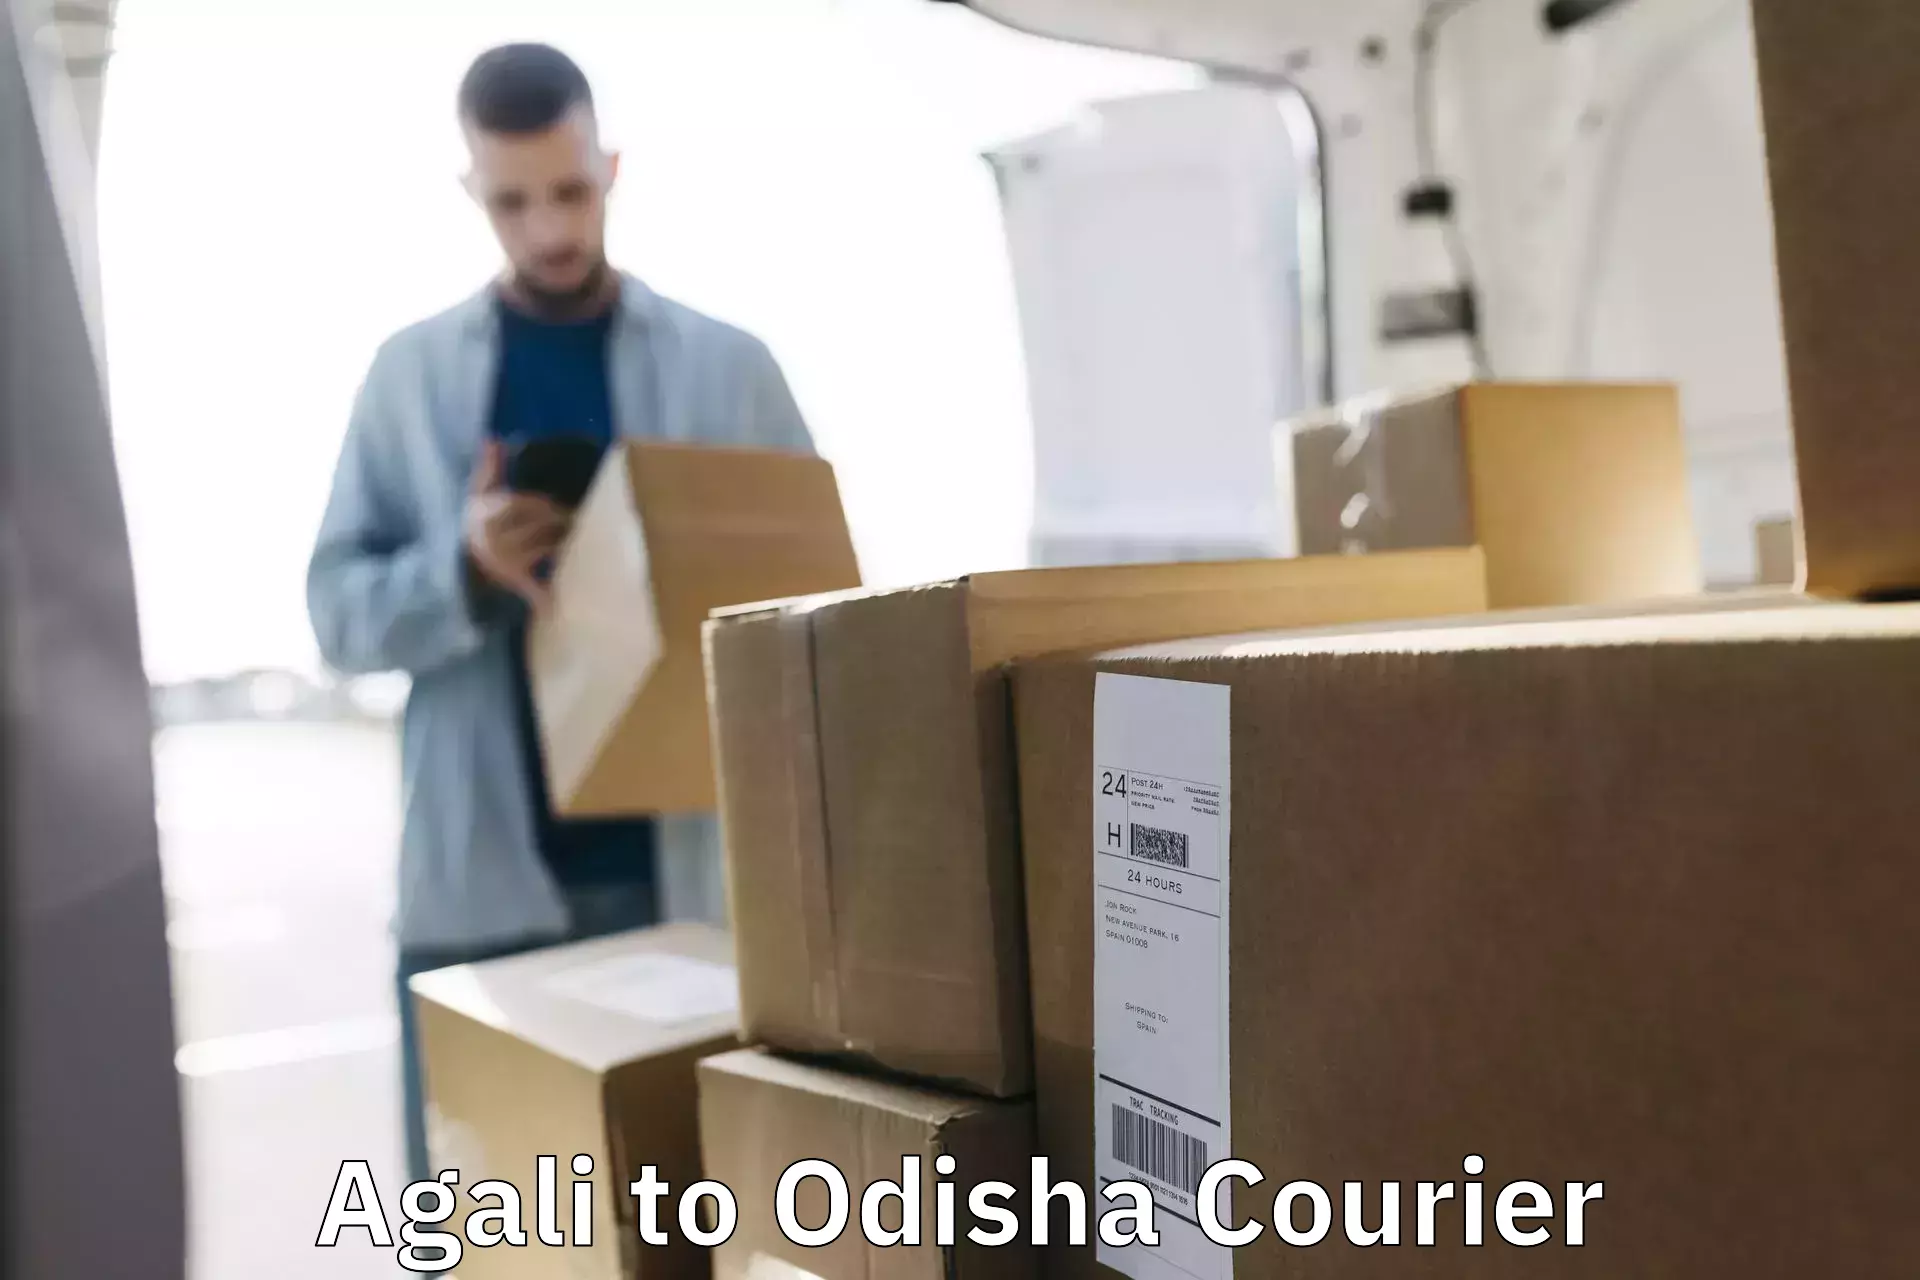 User-friendly courier app Agali to Mathili